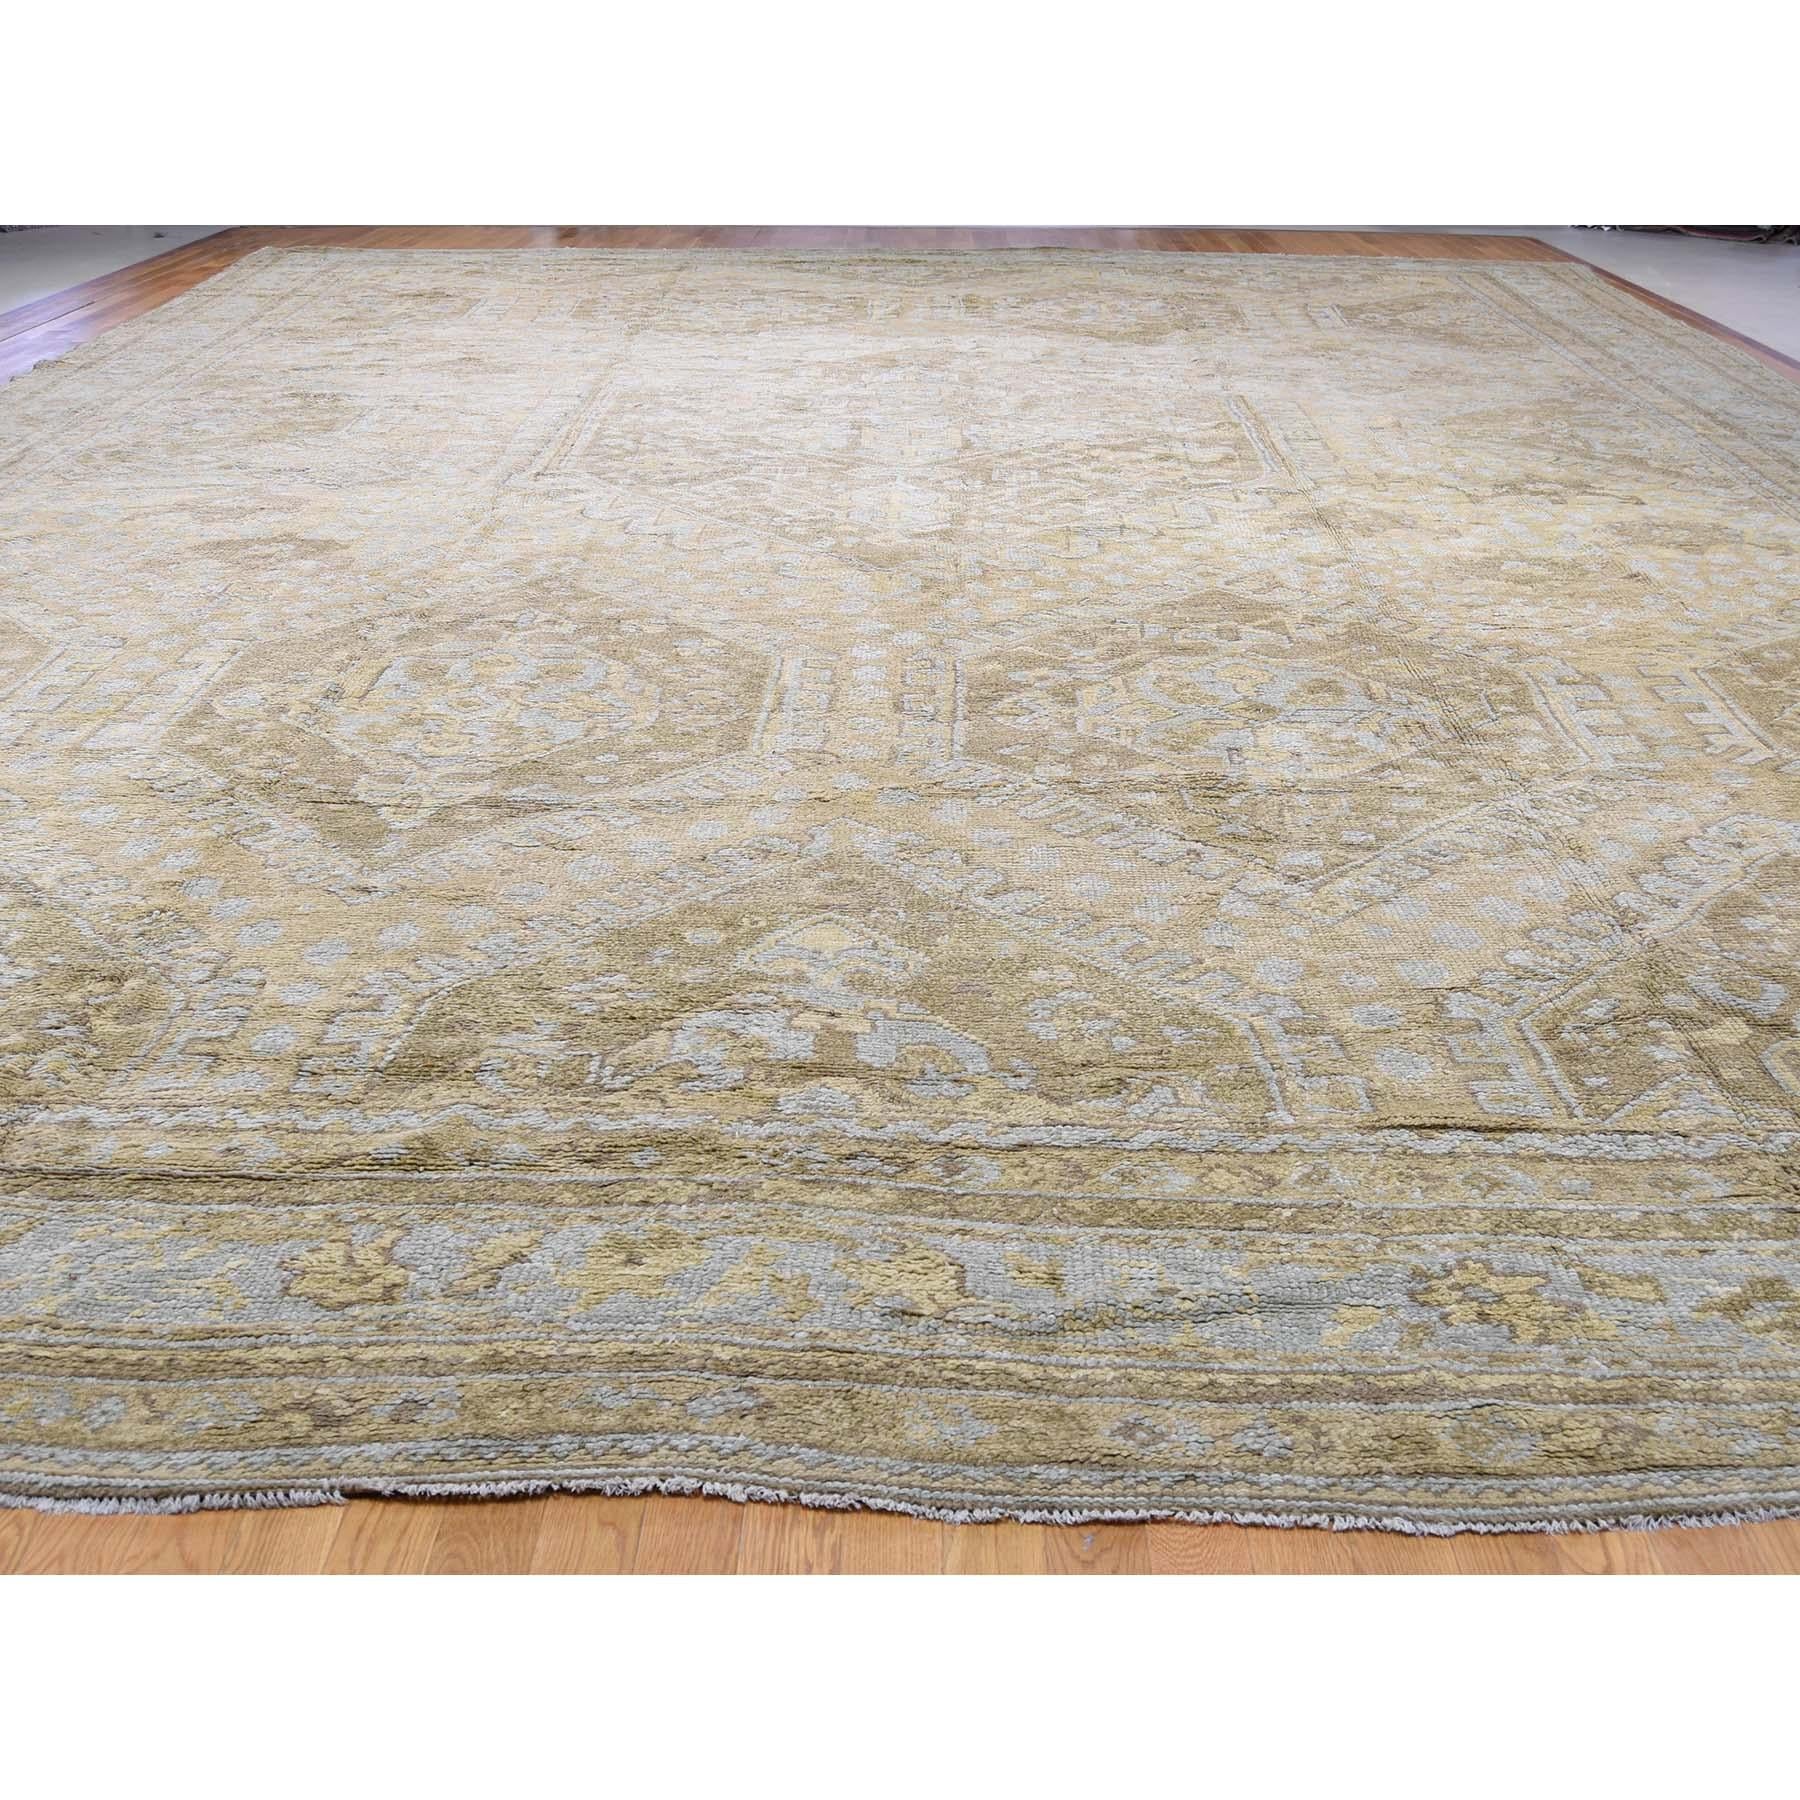 This is a truly genuine one-of-a-kind Hand-Knotted Antique Turkish Oushak Exc Cond Oversize Oriental Rug. It has been knotted for months and months in the centuries-old Persian weaving craftsmanship techniques by expert artisans.


Primary